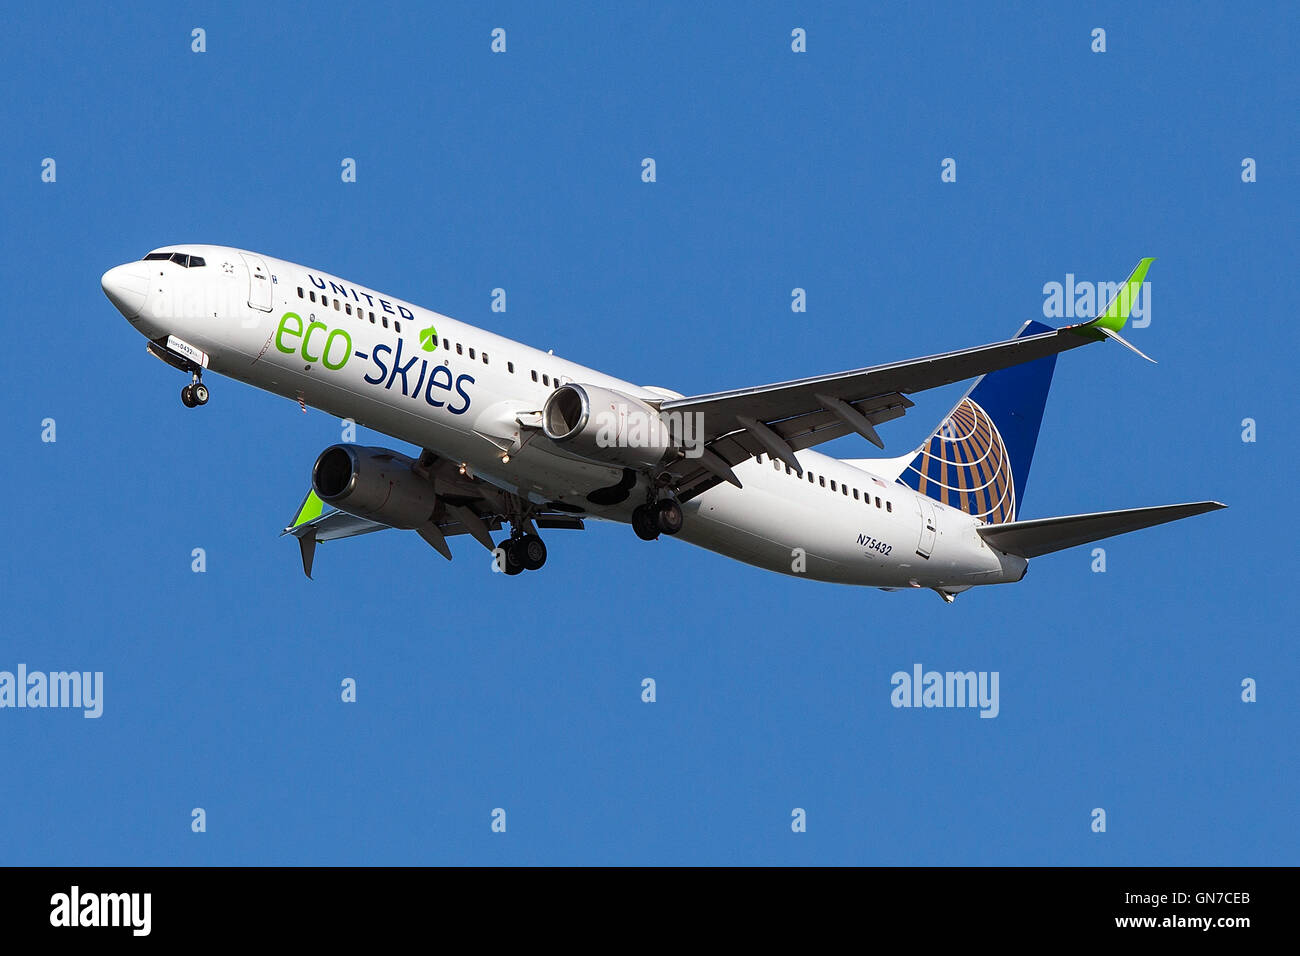 United Airlines Boeing 737-924ER (registration N75432) with eco-skies livery approaches San Francisco International Airport (SFO) over San Mateo, California, United States of America Stock Photo